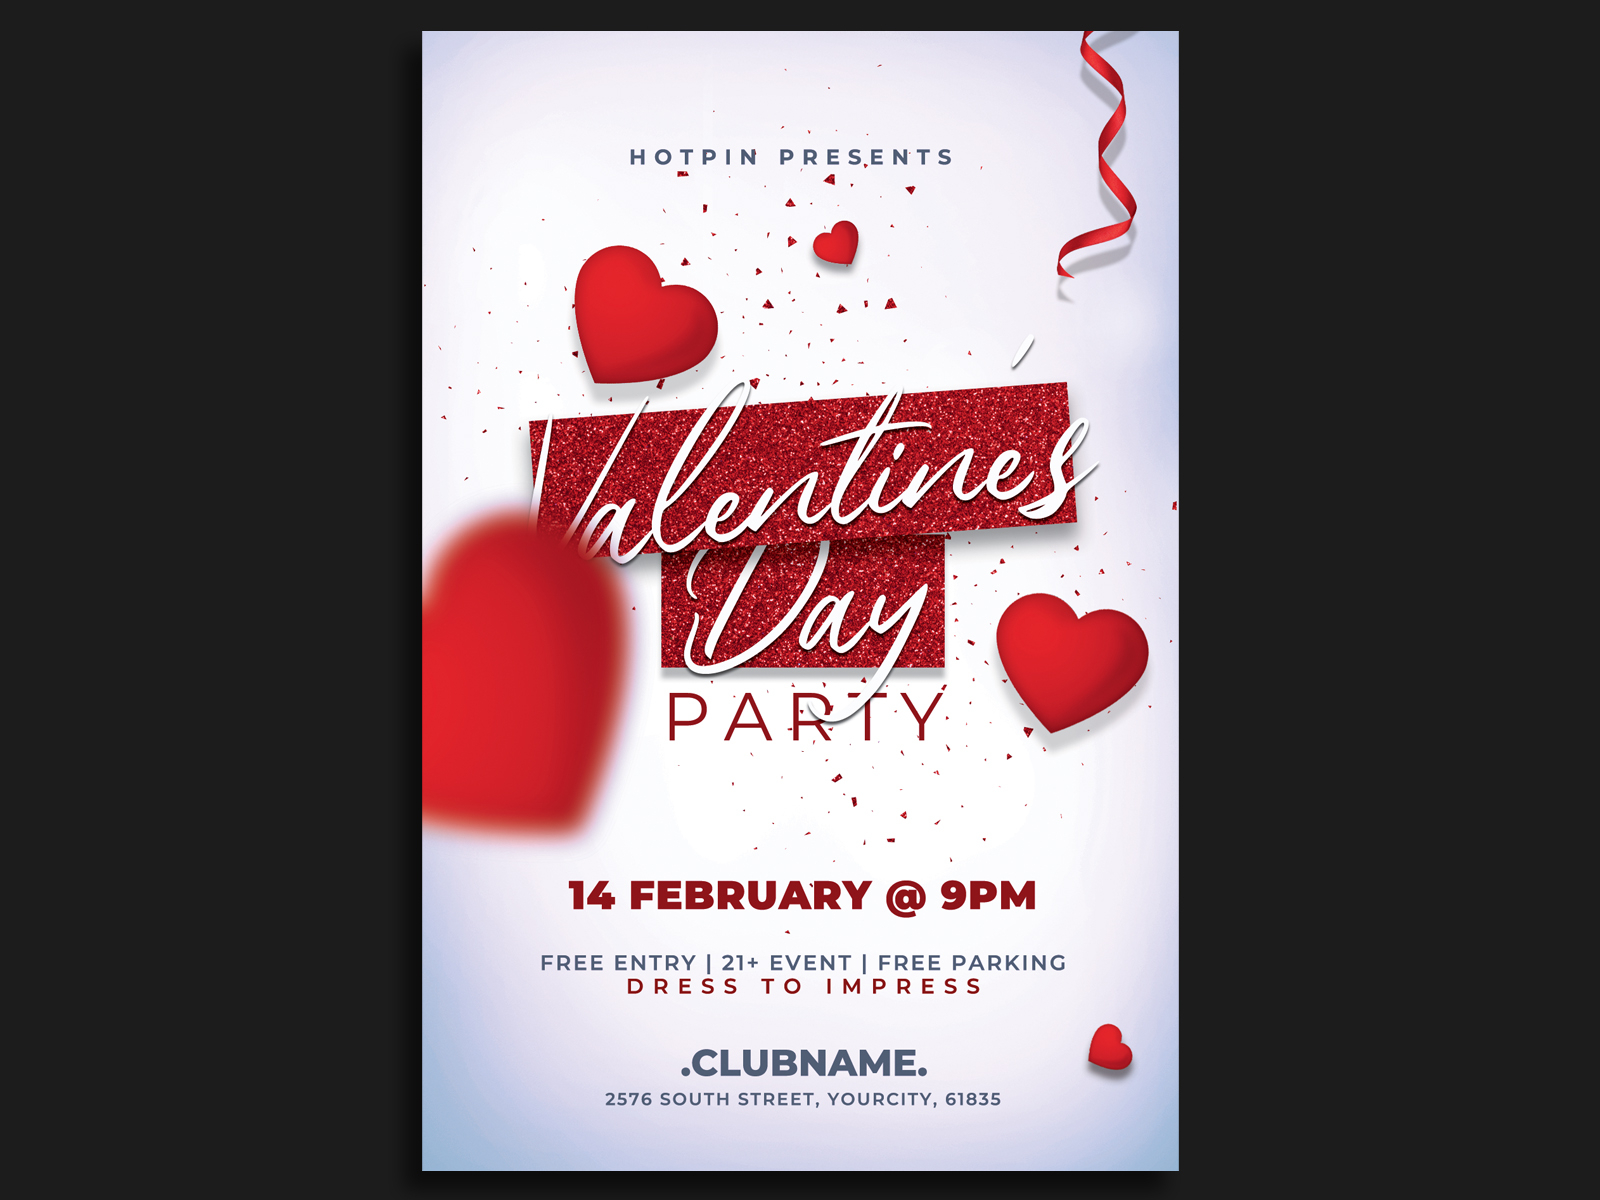 Valentines Day Flyer Template by Hotpin on Dribbble Regarding Valentines Day Flyer Template Free